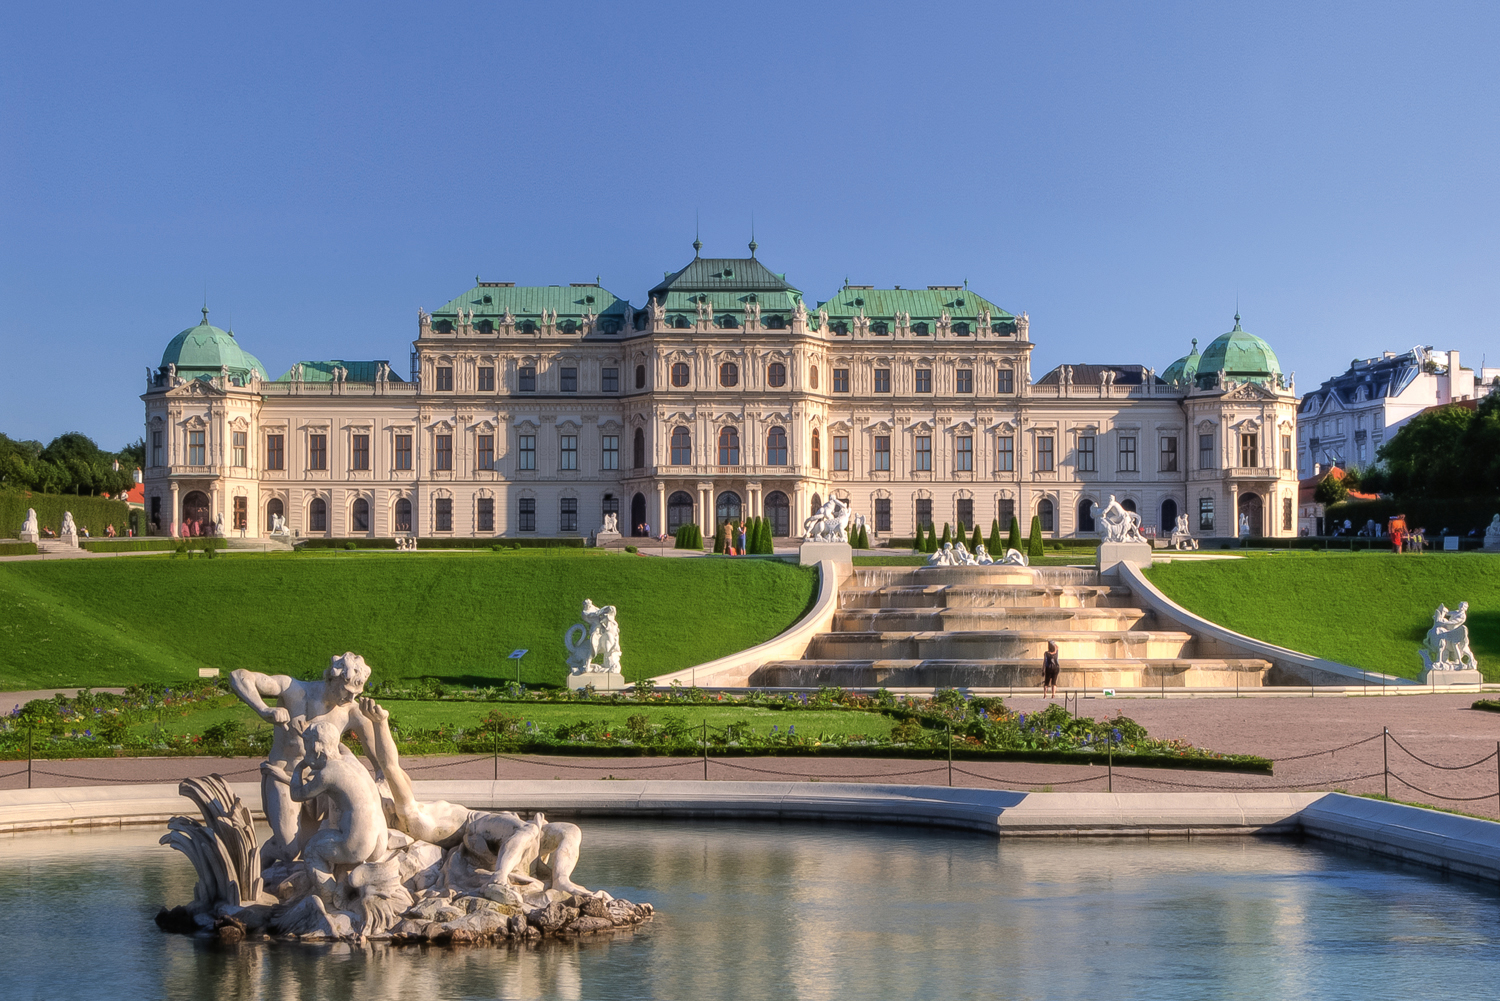 One of the most important baroque buildings in Vienna, the Schloss Belverdere.